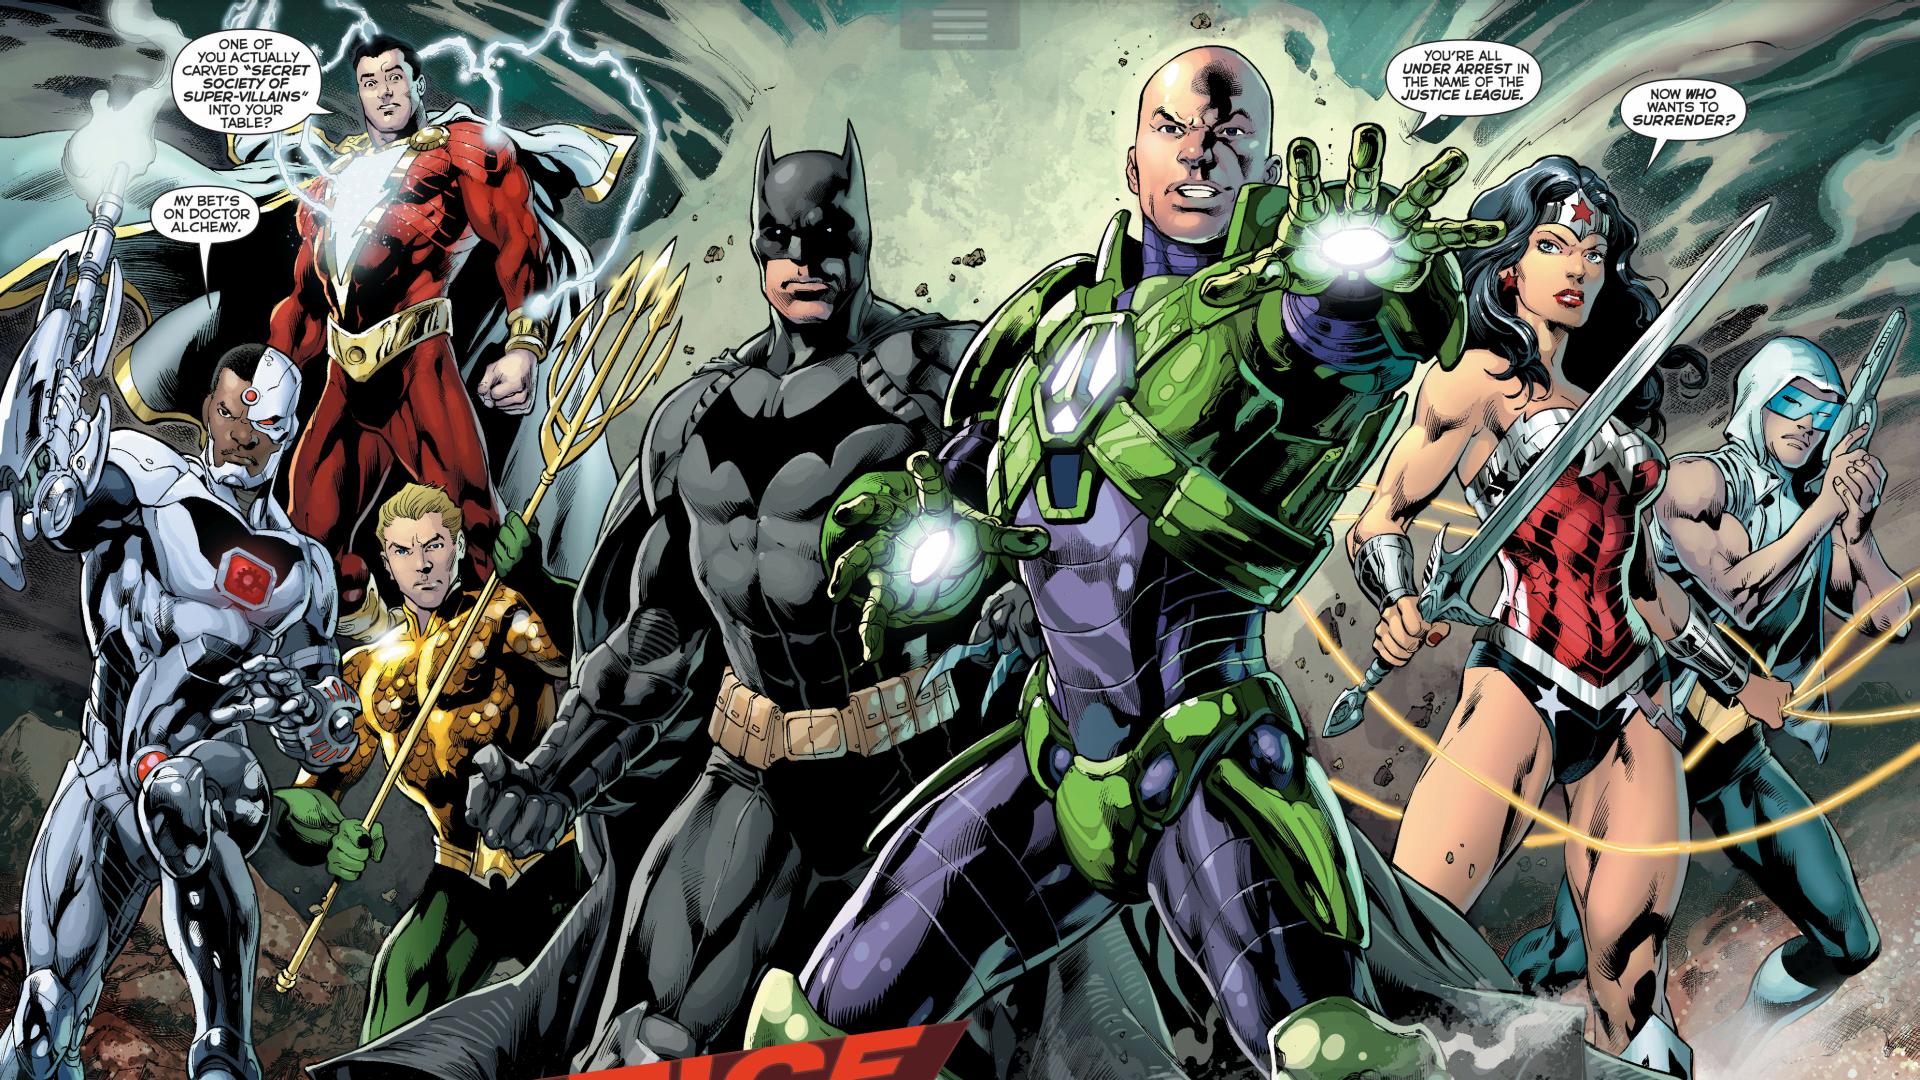 Post Forever Evil Justice League( Spoilers)